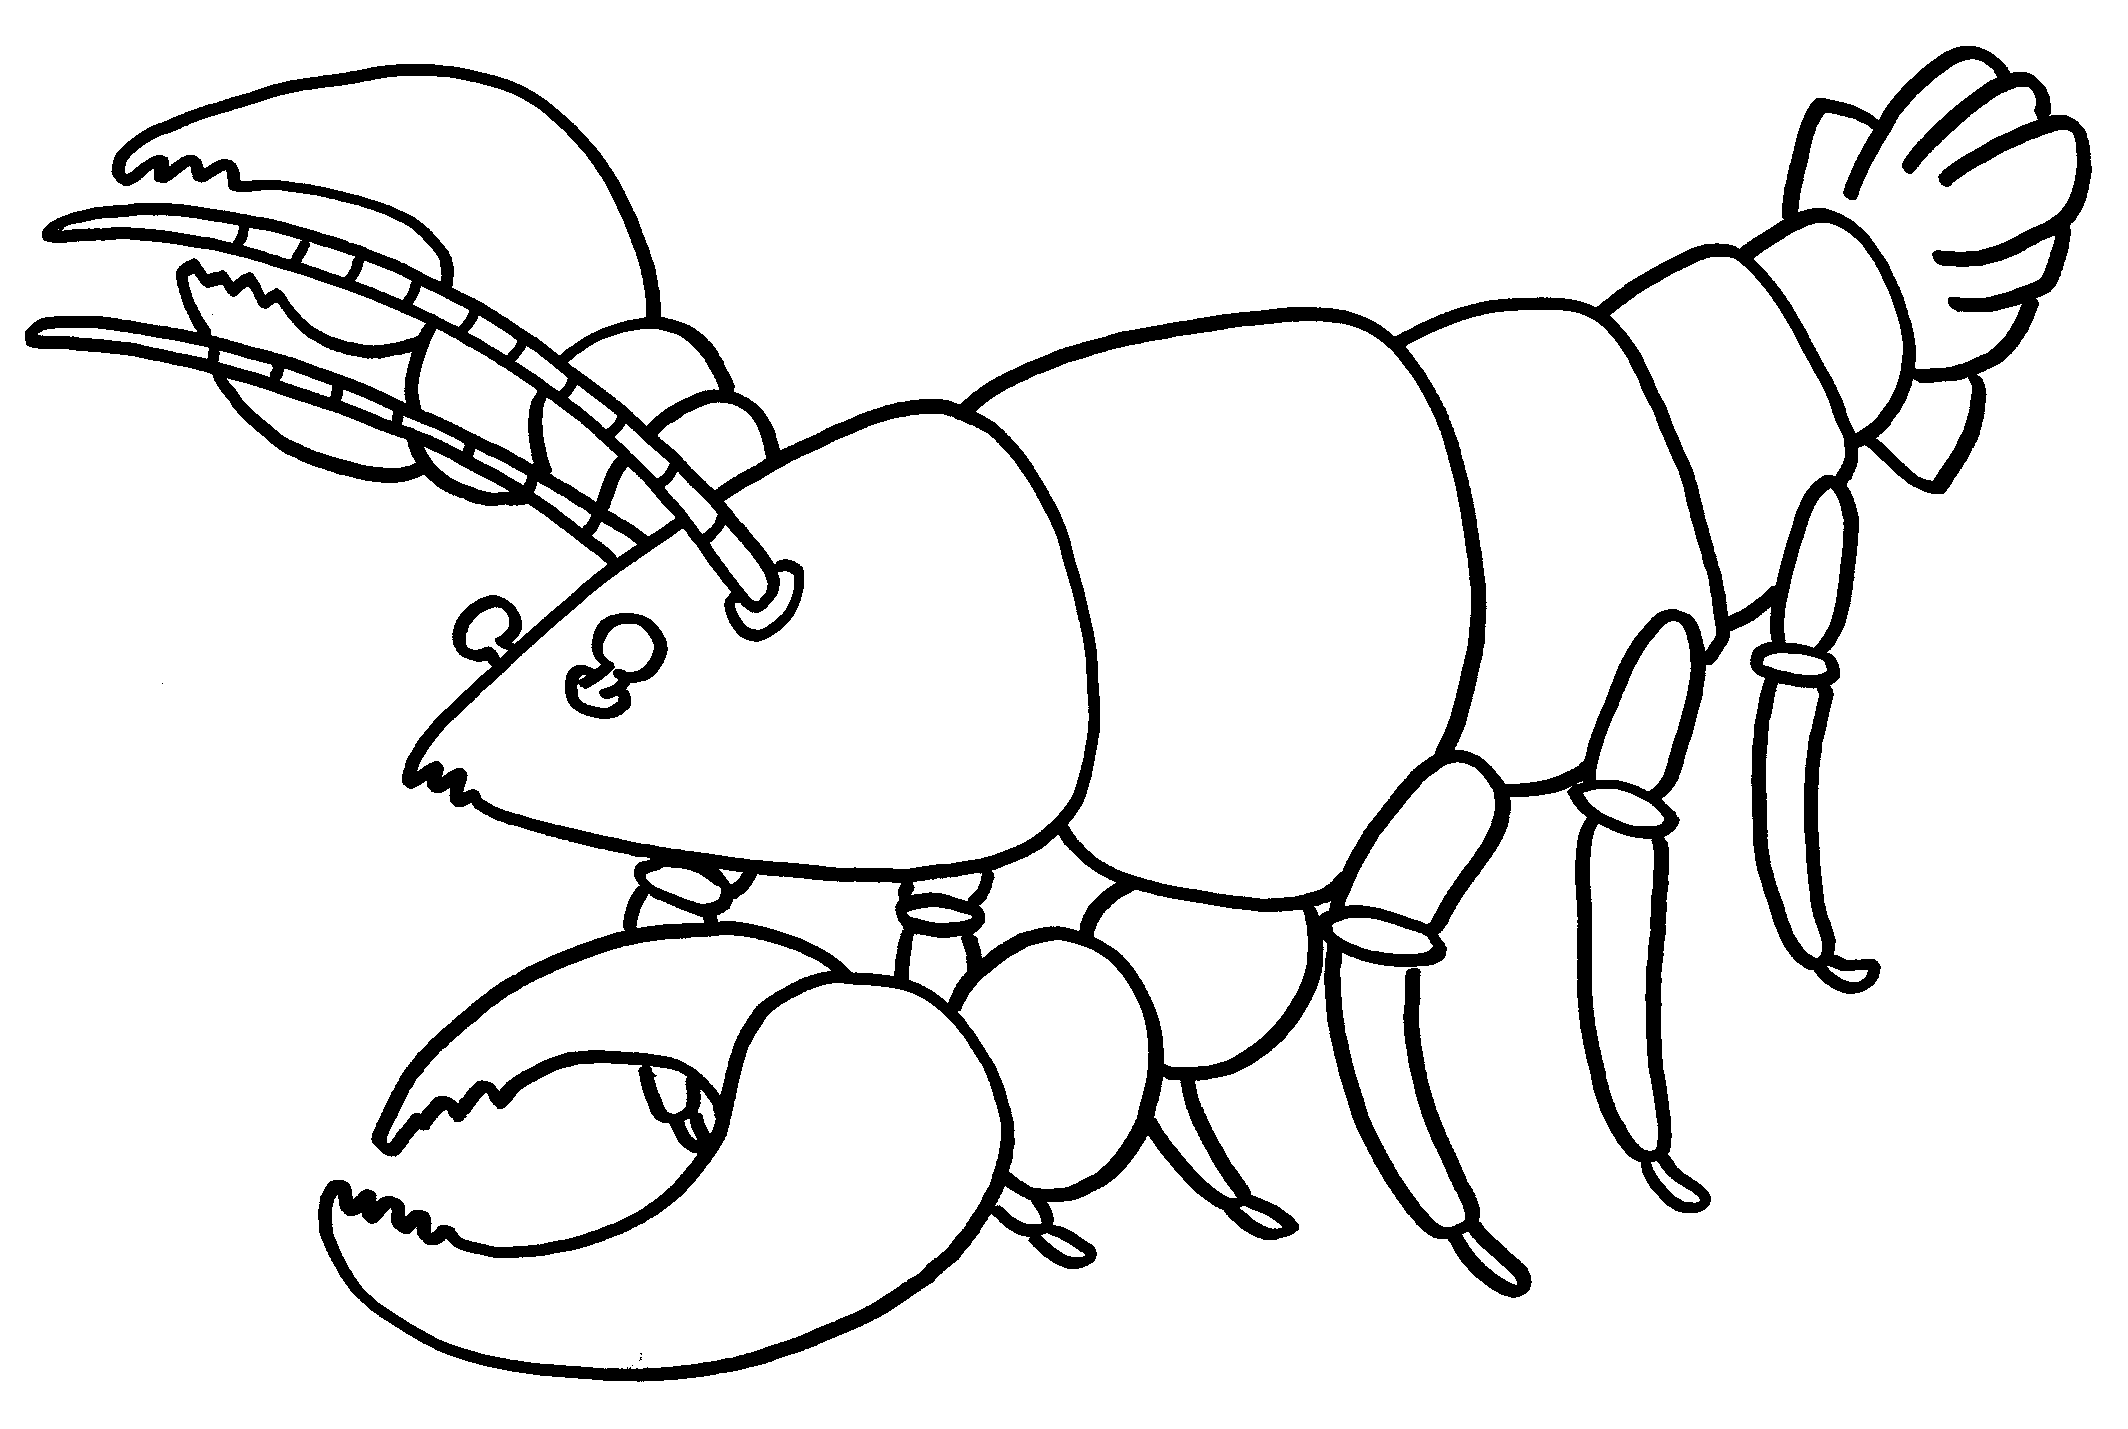 Lobster clip art free clipart images 2